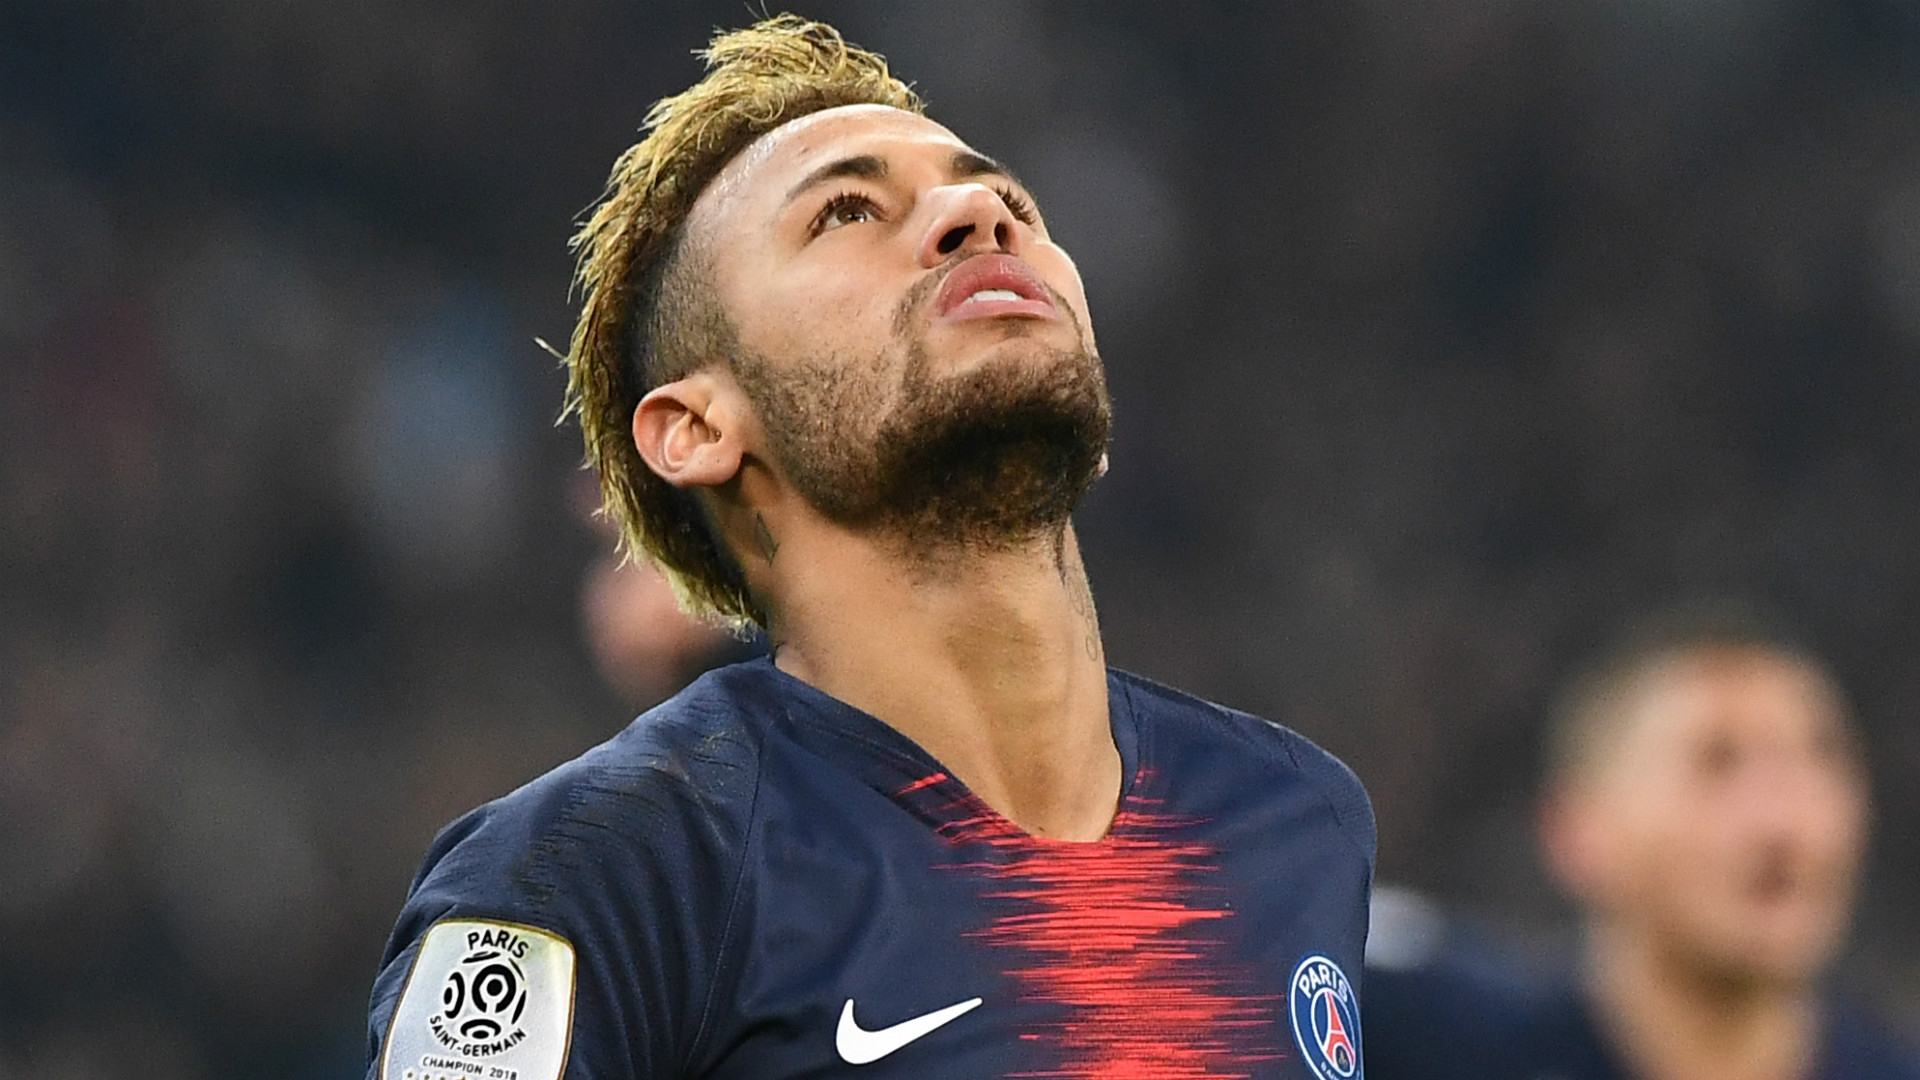 1920x1080 PSG news: Neymar slams 'lack of respect' from Ligue 1 fans after bottle throwing incident | English Saudi Arabia